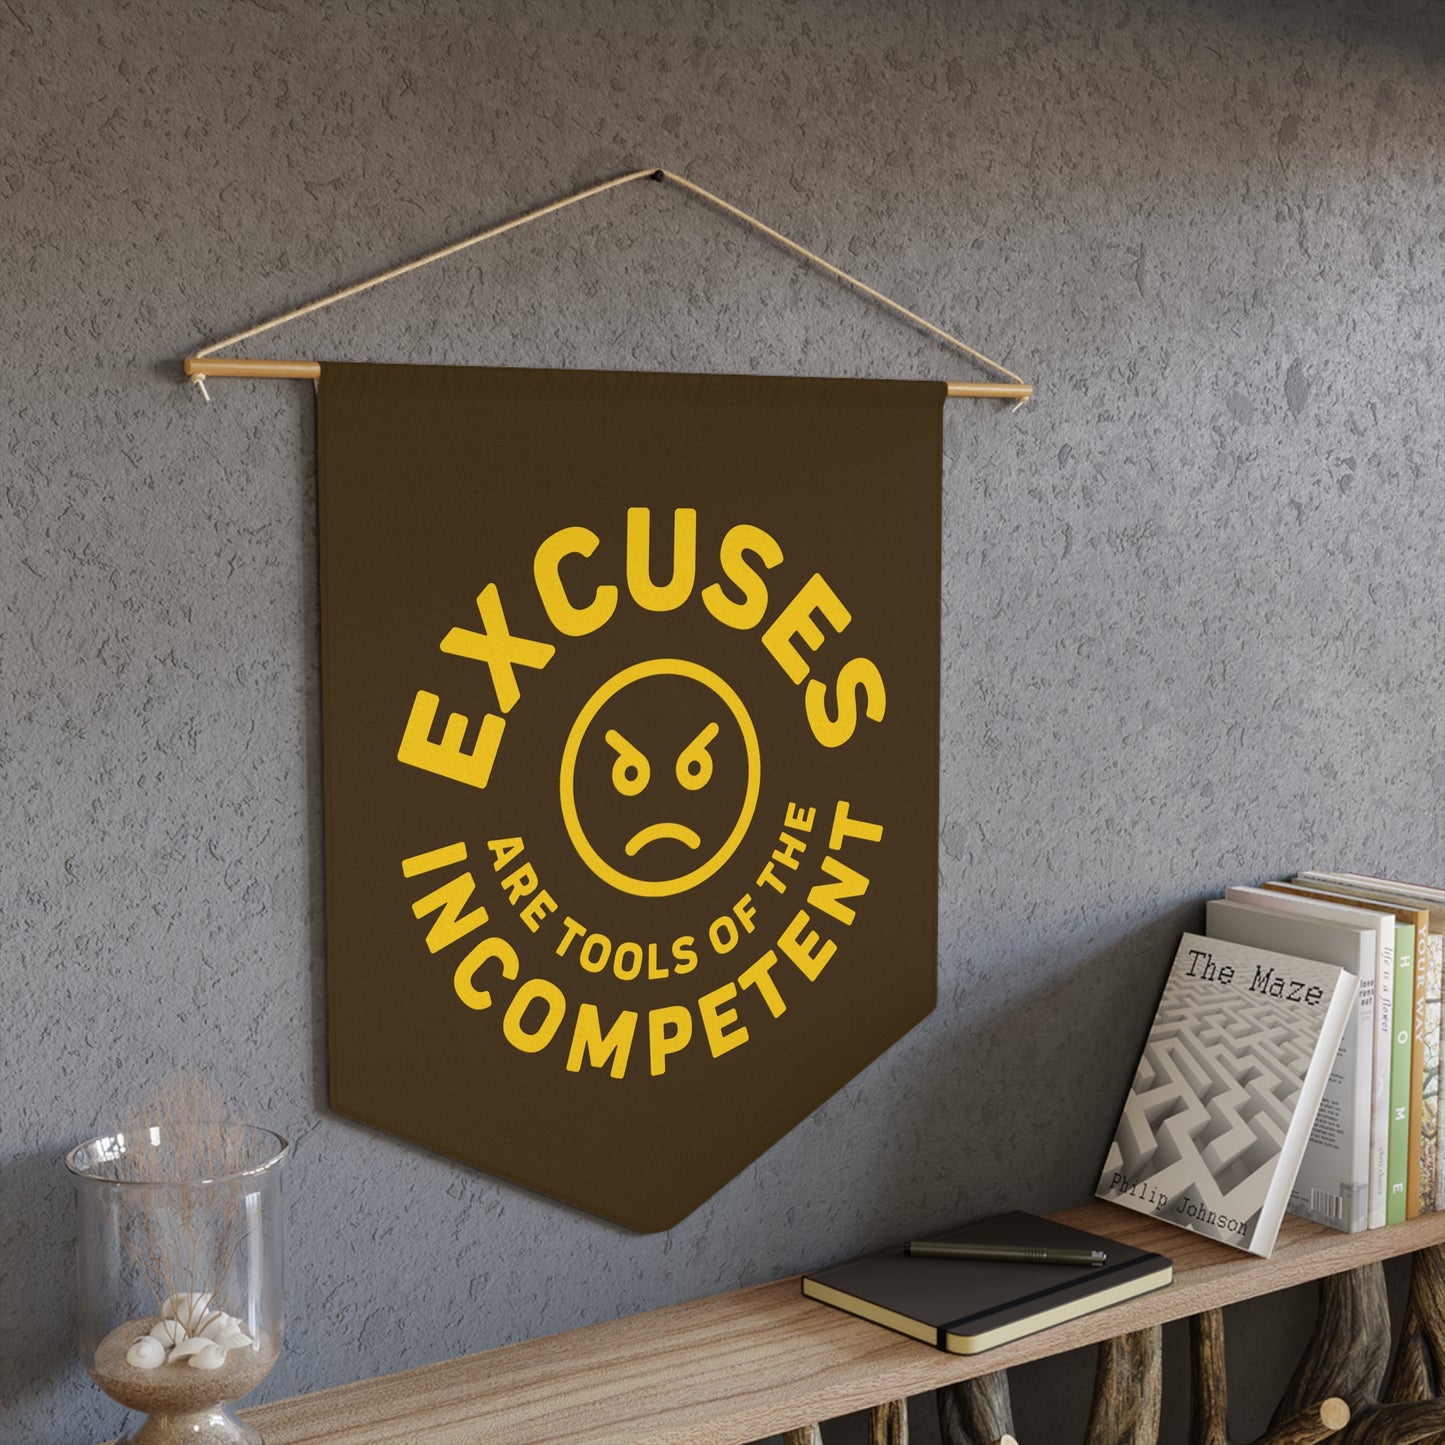 Excuses Pennant - Gold on Brown